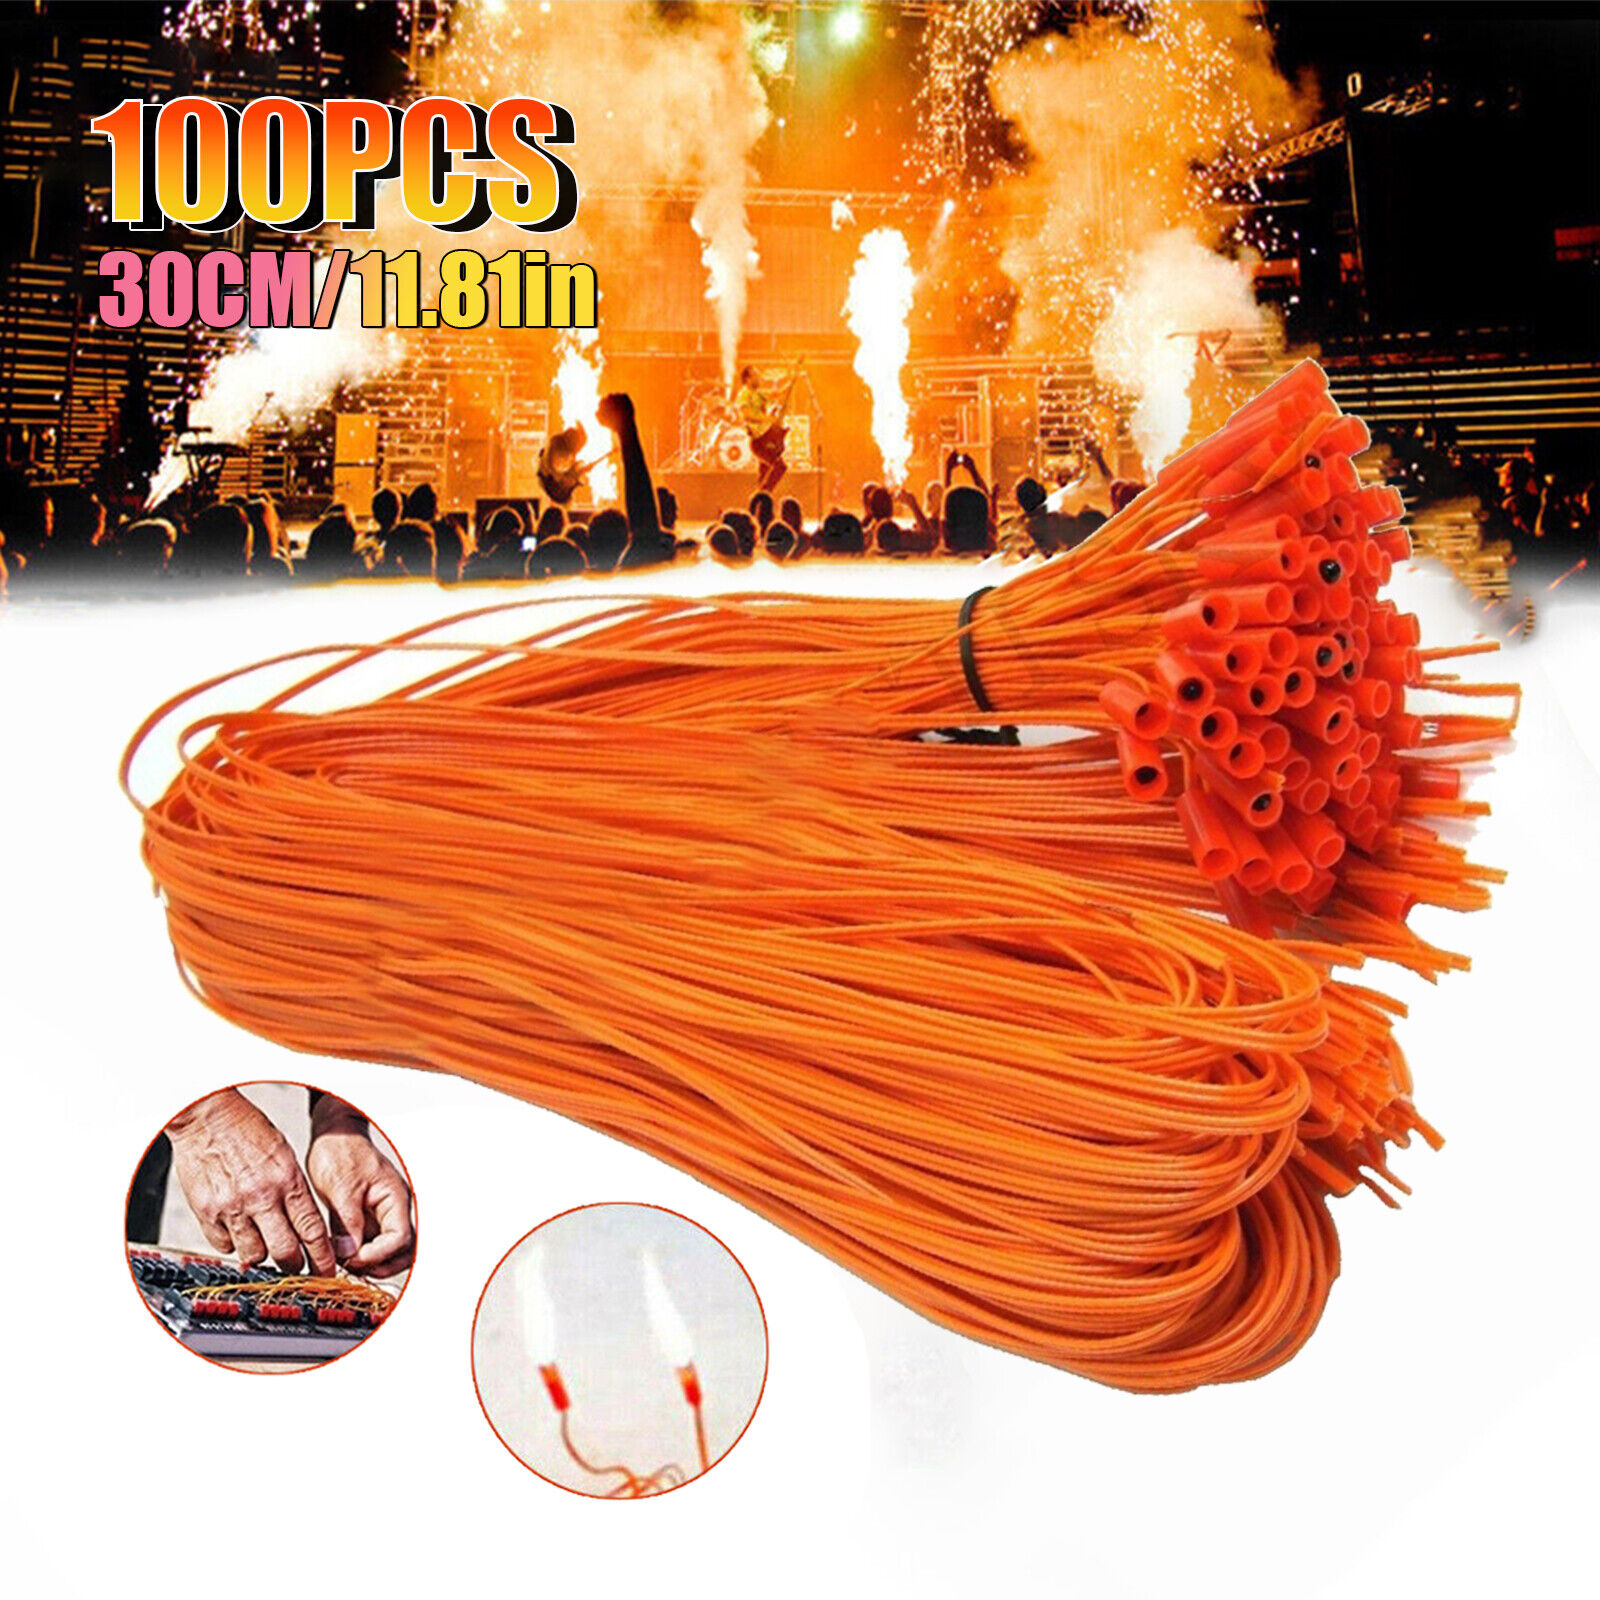 100pcs/11.81in Electric Connecting Wire for Firework Firing System Match Igniter